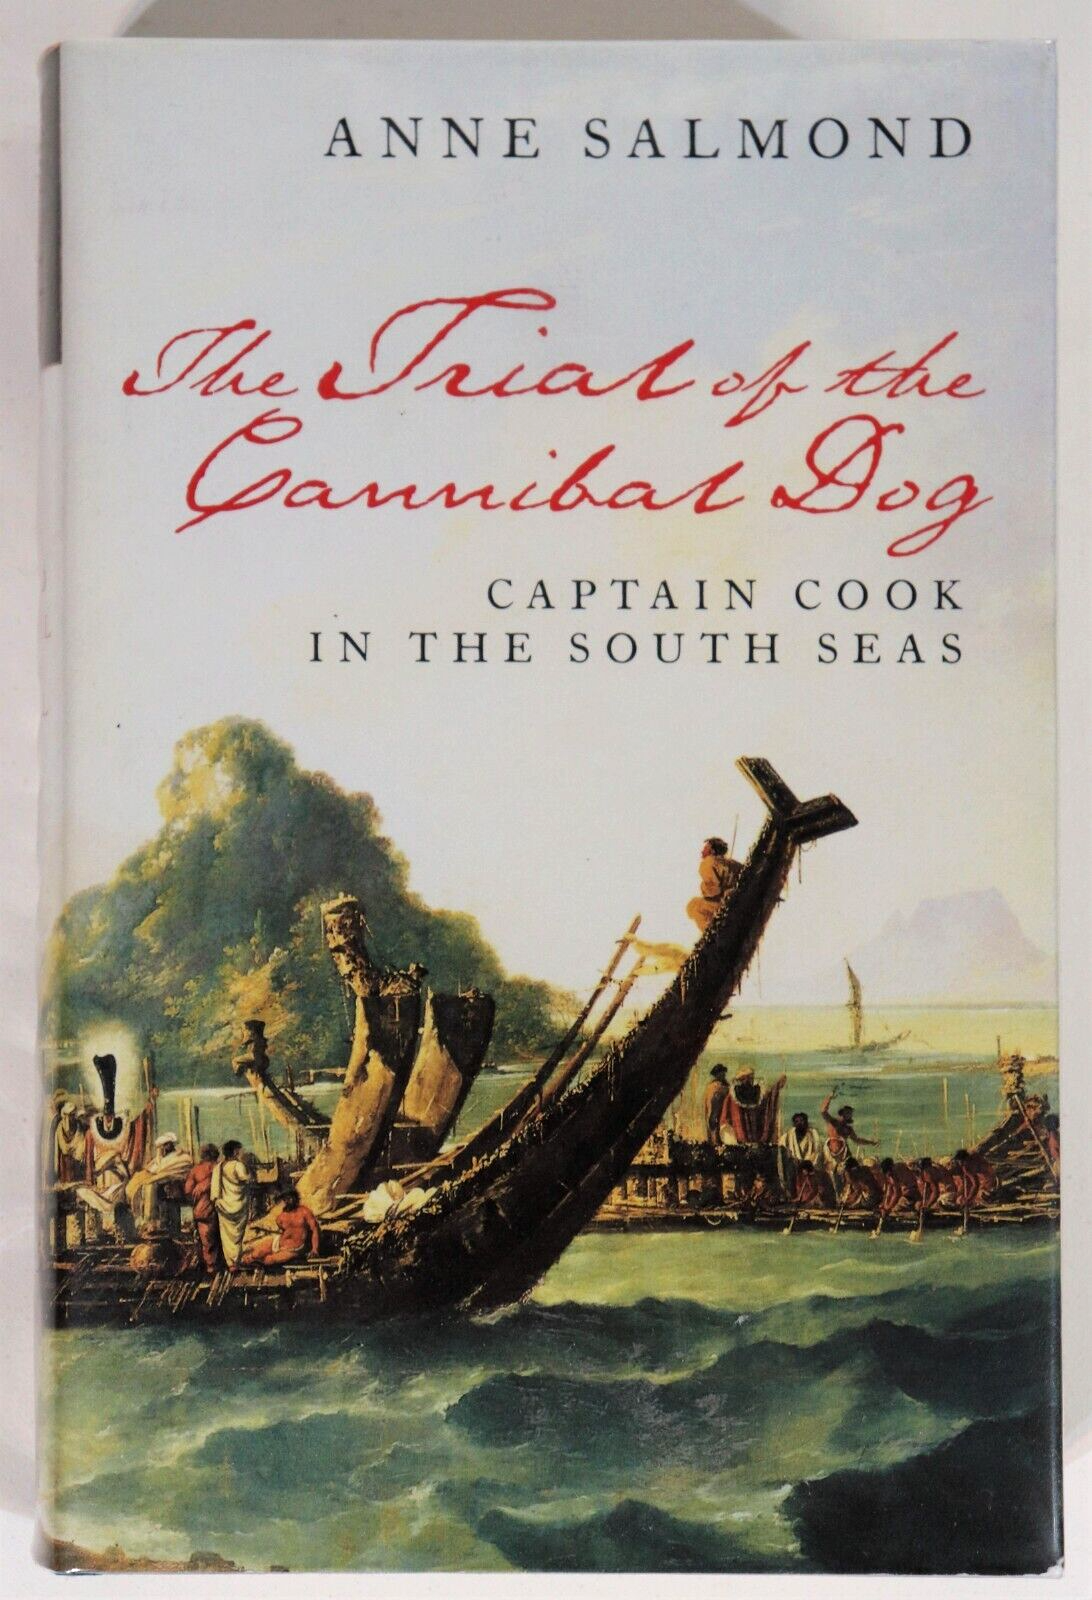 The Trial Of The Cannibal Dog: Captain Cook - 2003 - Australian History Book